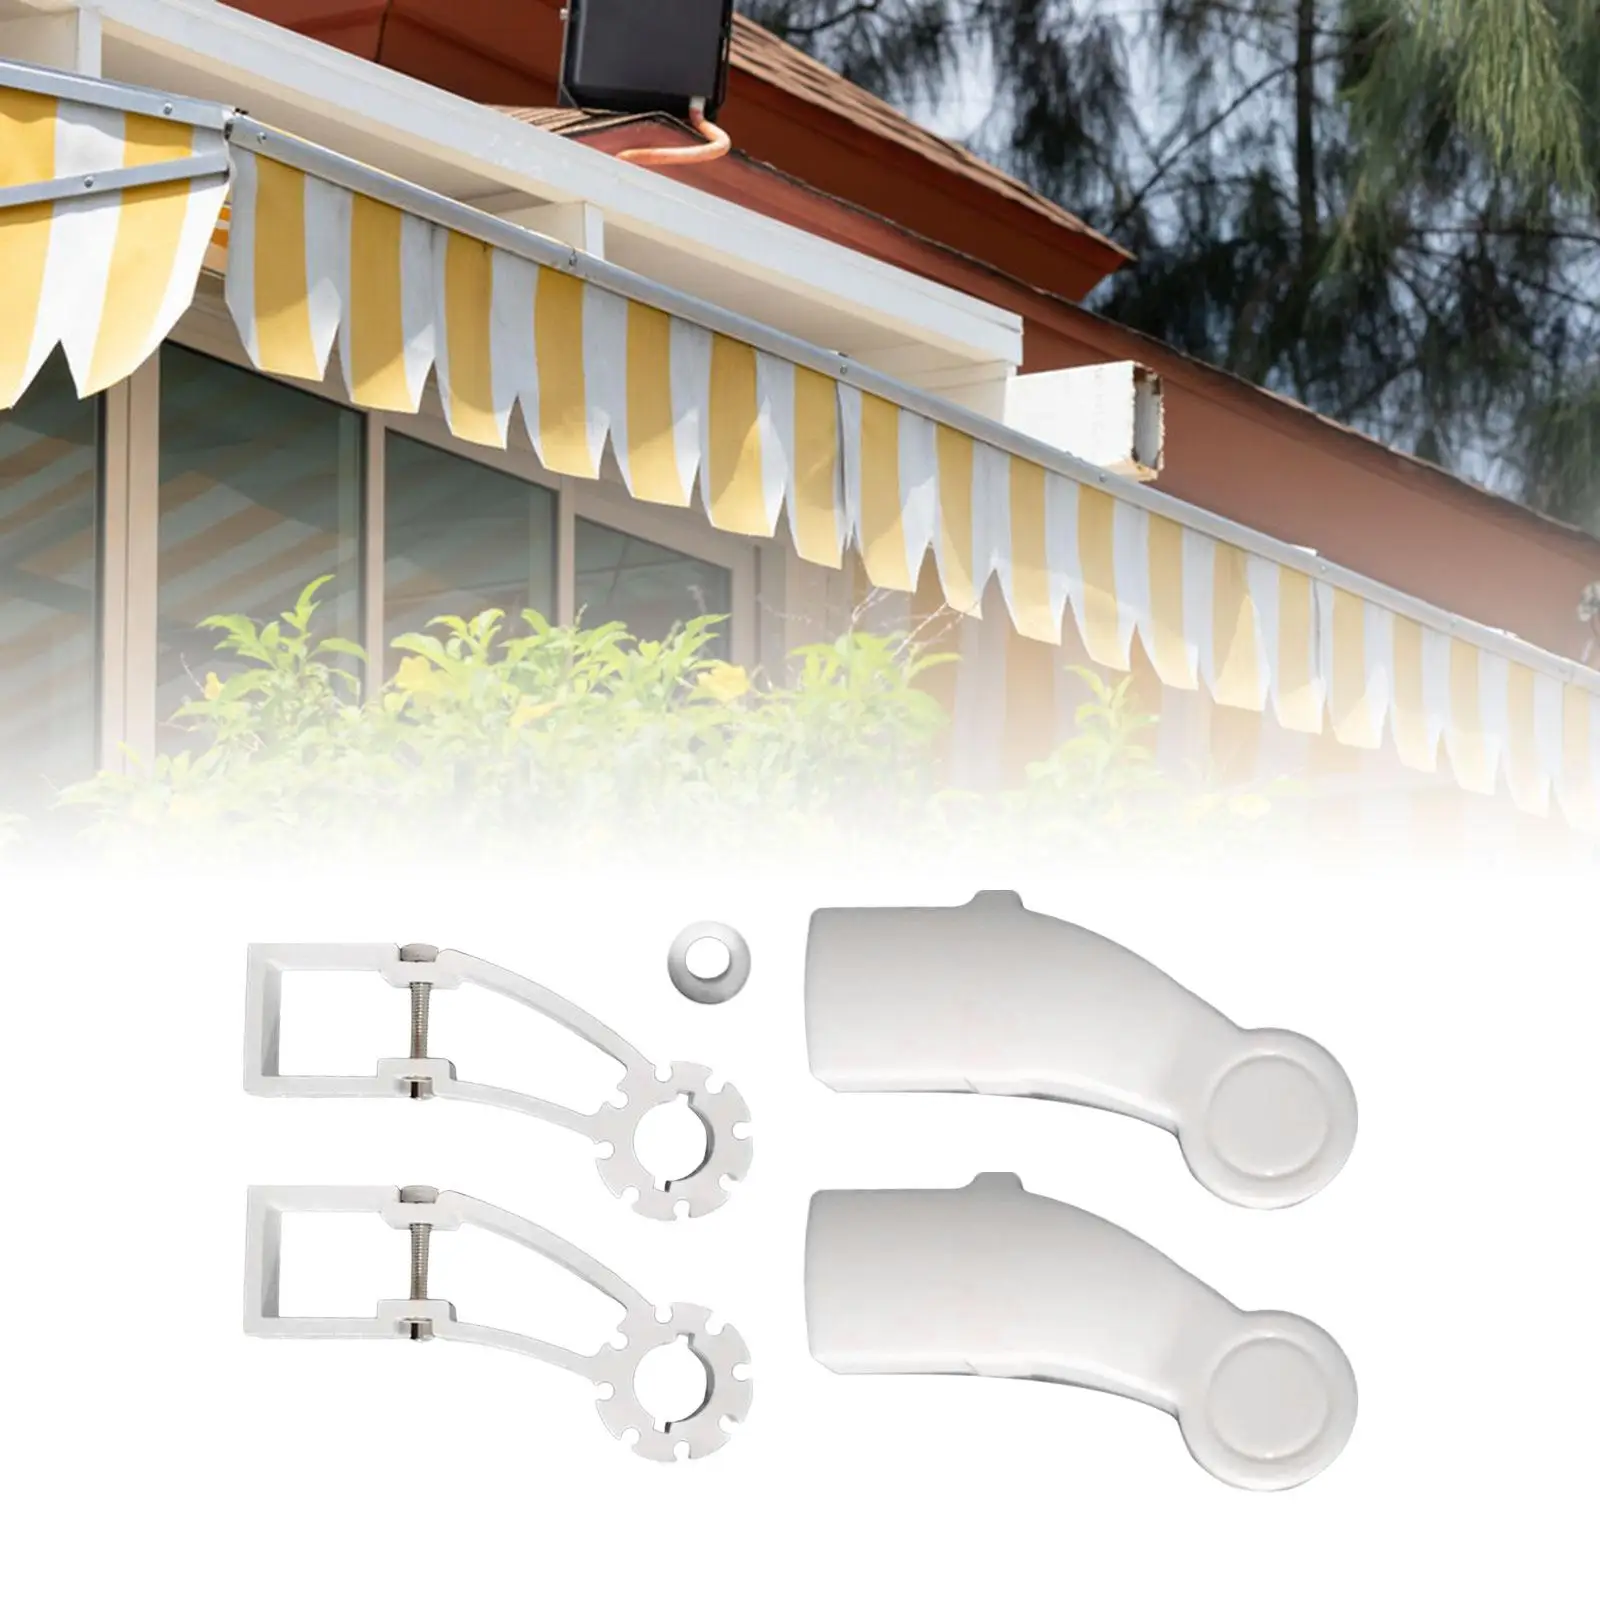 Awning Brackets Accessories suits 40mm Square Tube, Outdoor ,White Aluminum Alloy Replacement Side Brackets for Camper RV